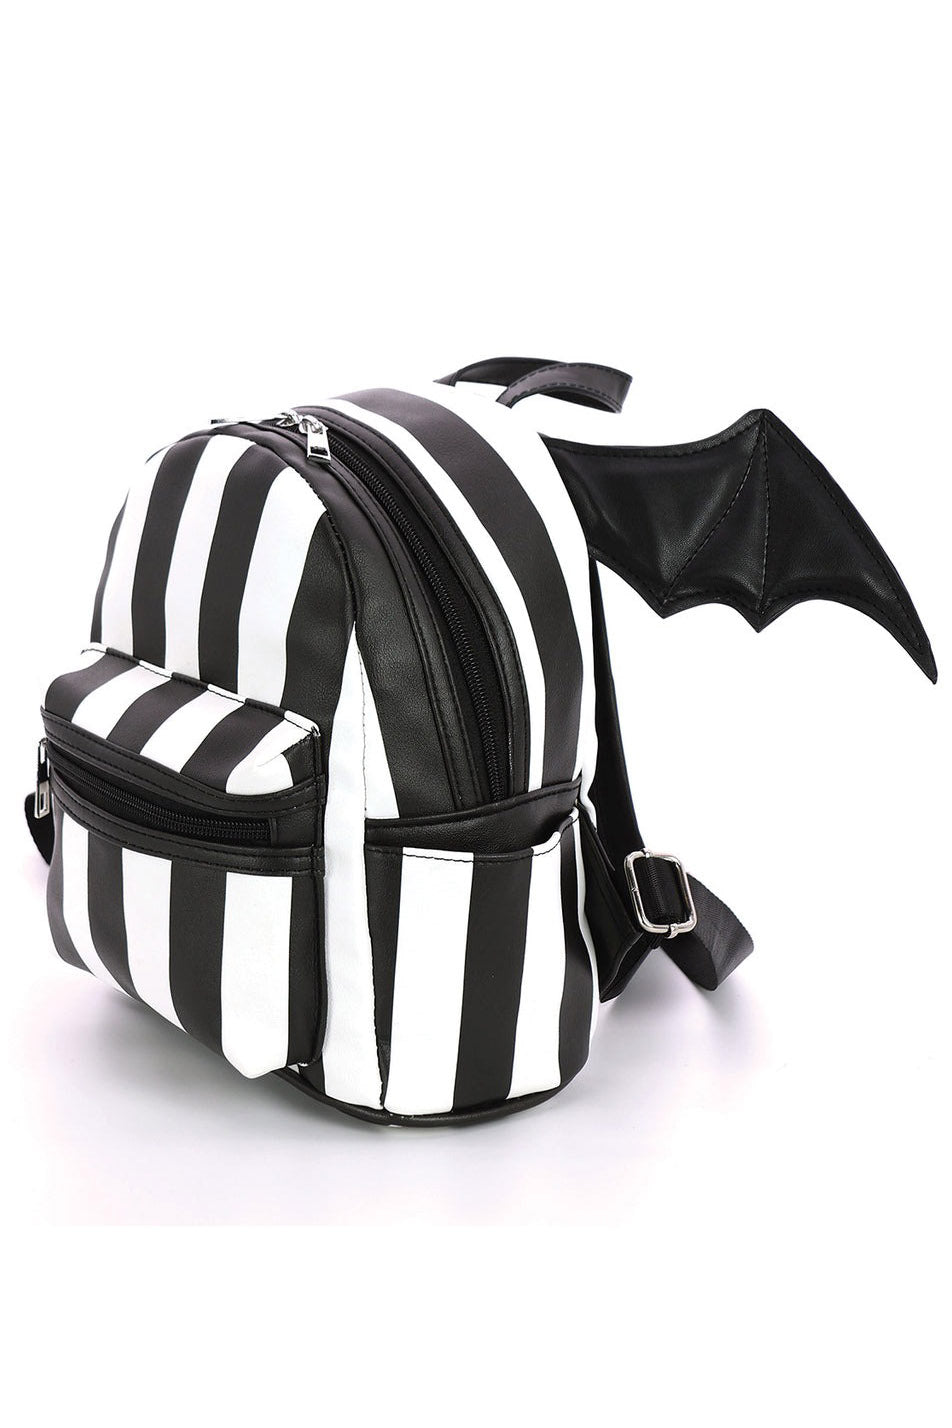 gothabilly black and white striped retro backpack